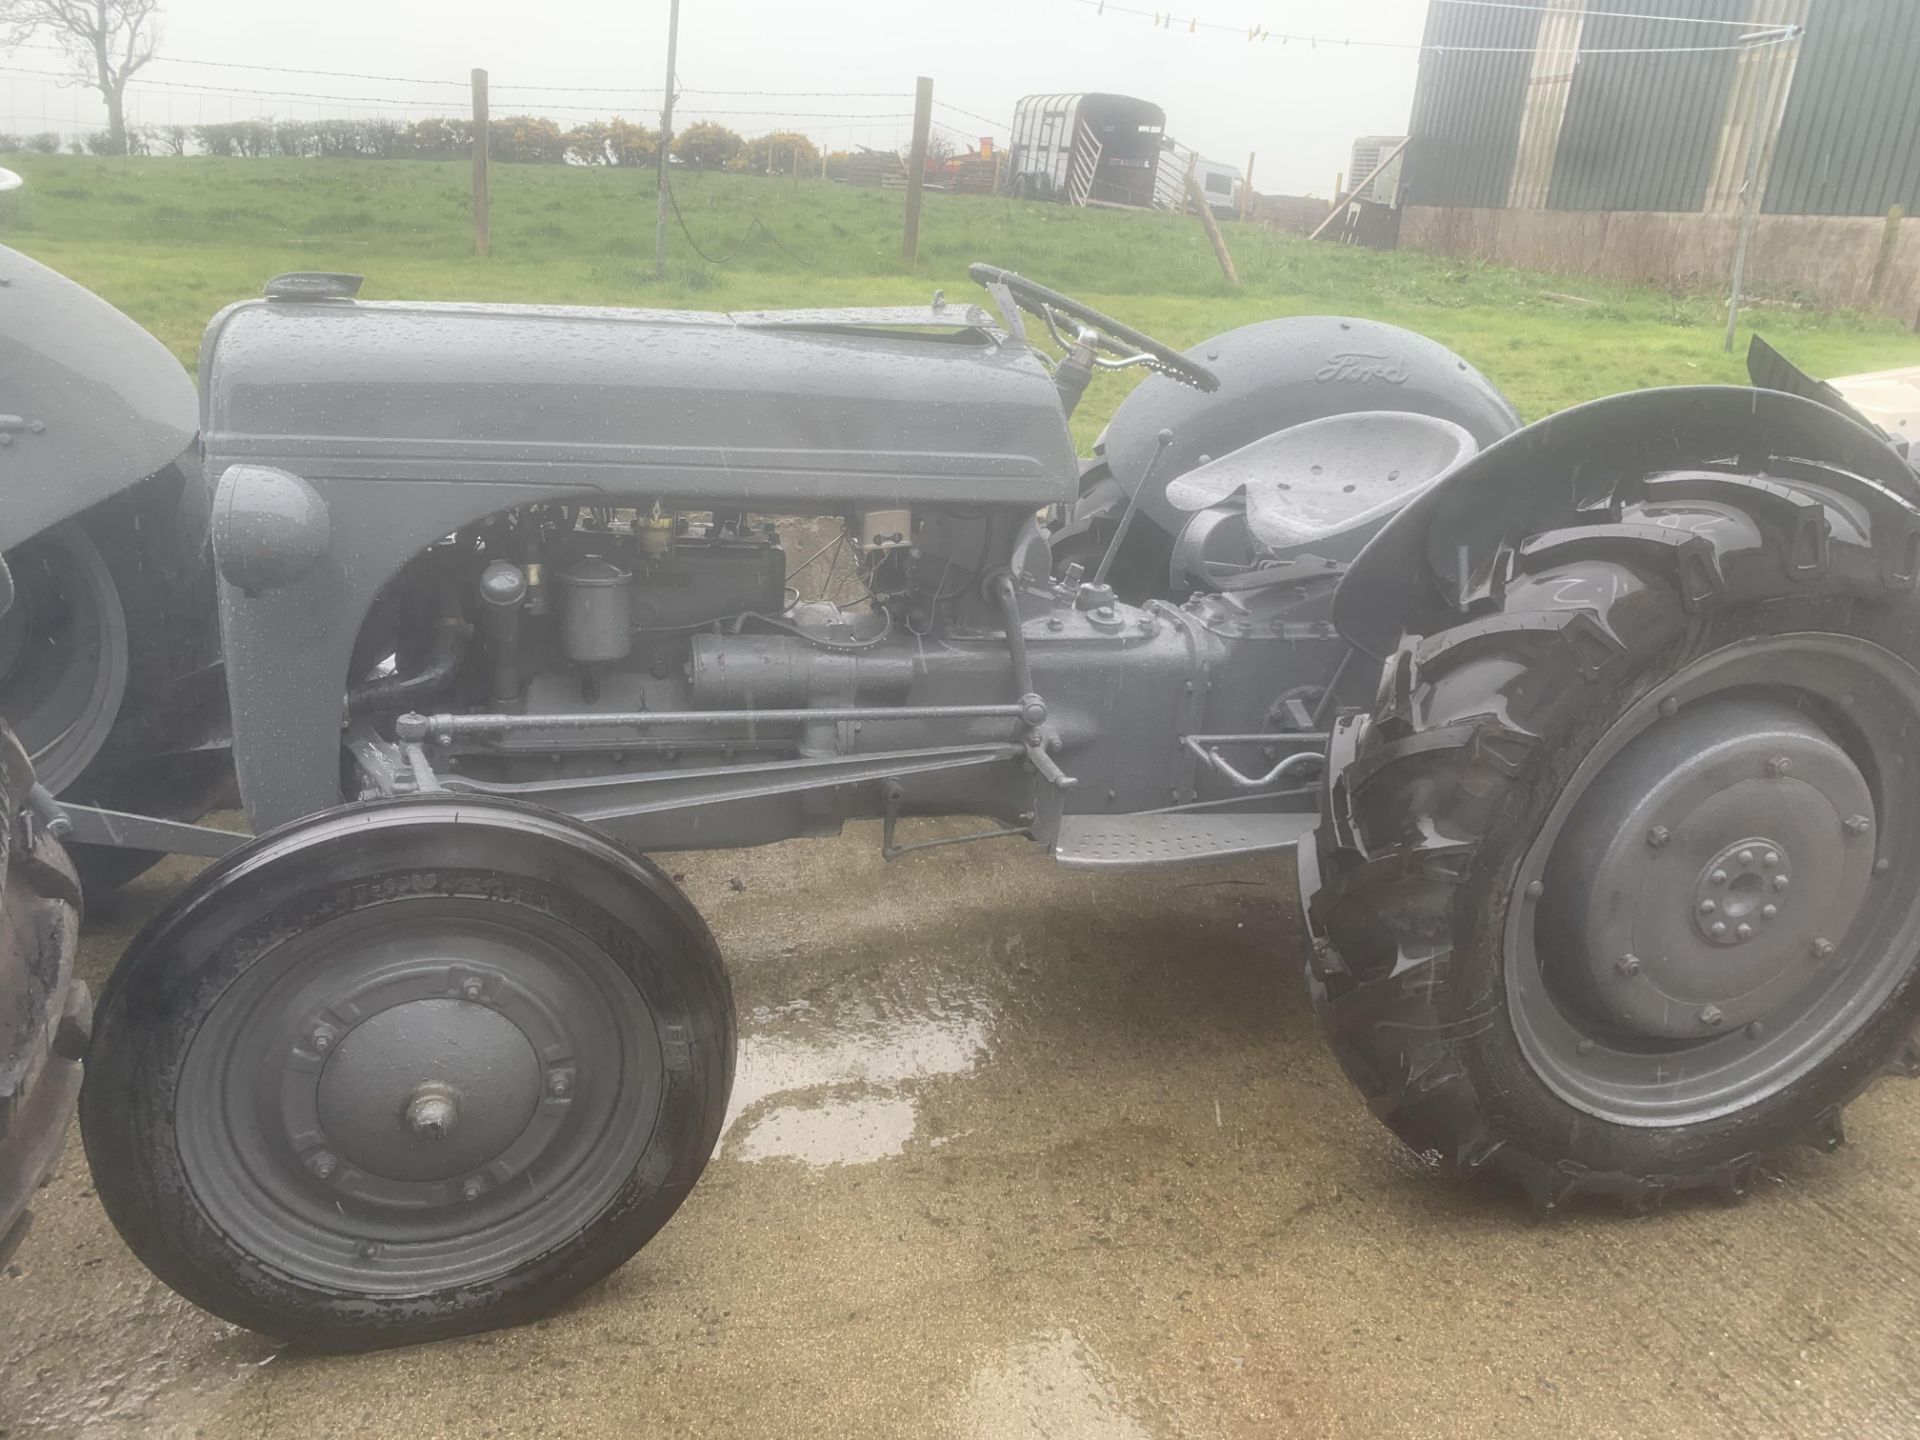 FORD FERGUSON 9N VINTAGE CLASSIC TRACTOR FULLY RESTORED  NEW TYRES ALL ROUND  UNDERSLUNG EXHAUST